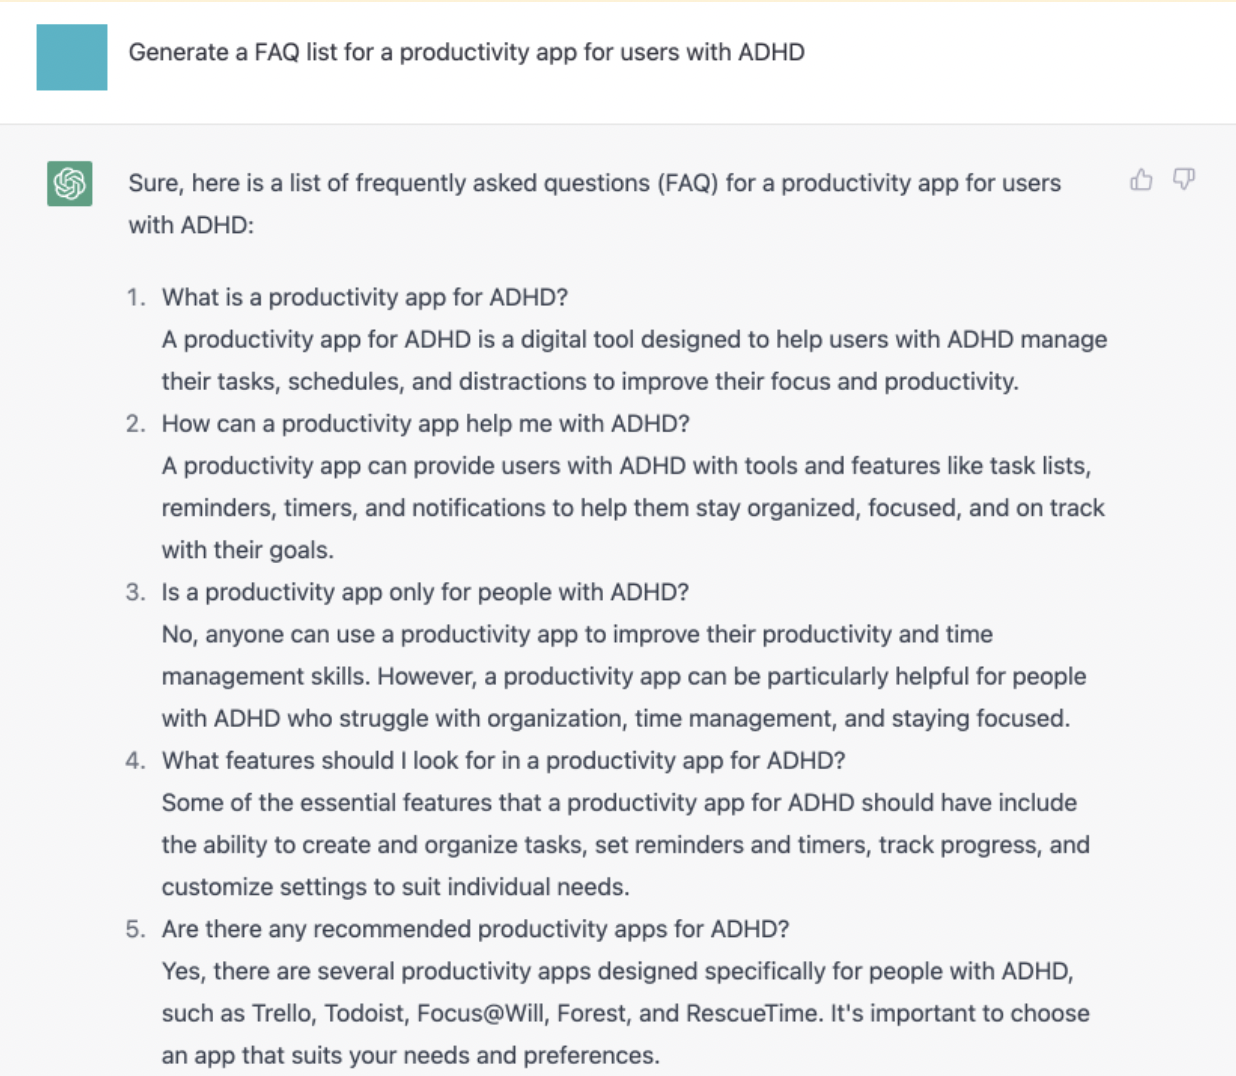 Use case with a prompt “Generate a FAQ list for a productivity app for users with ADHD”.